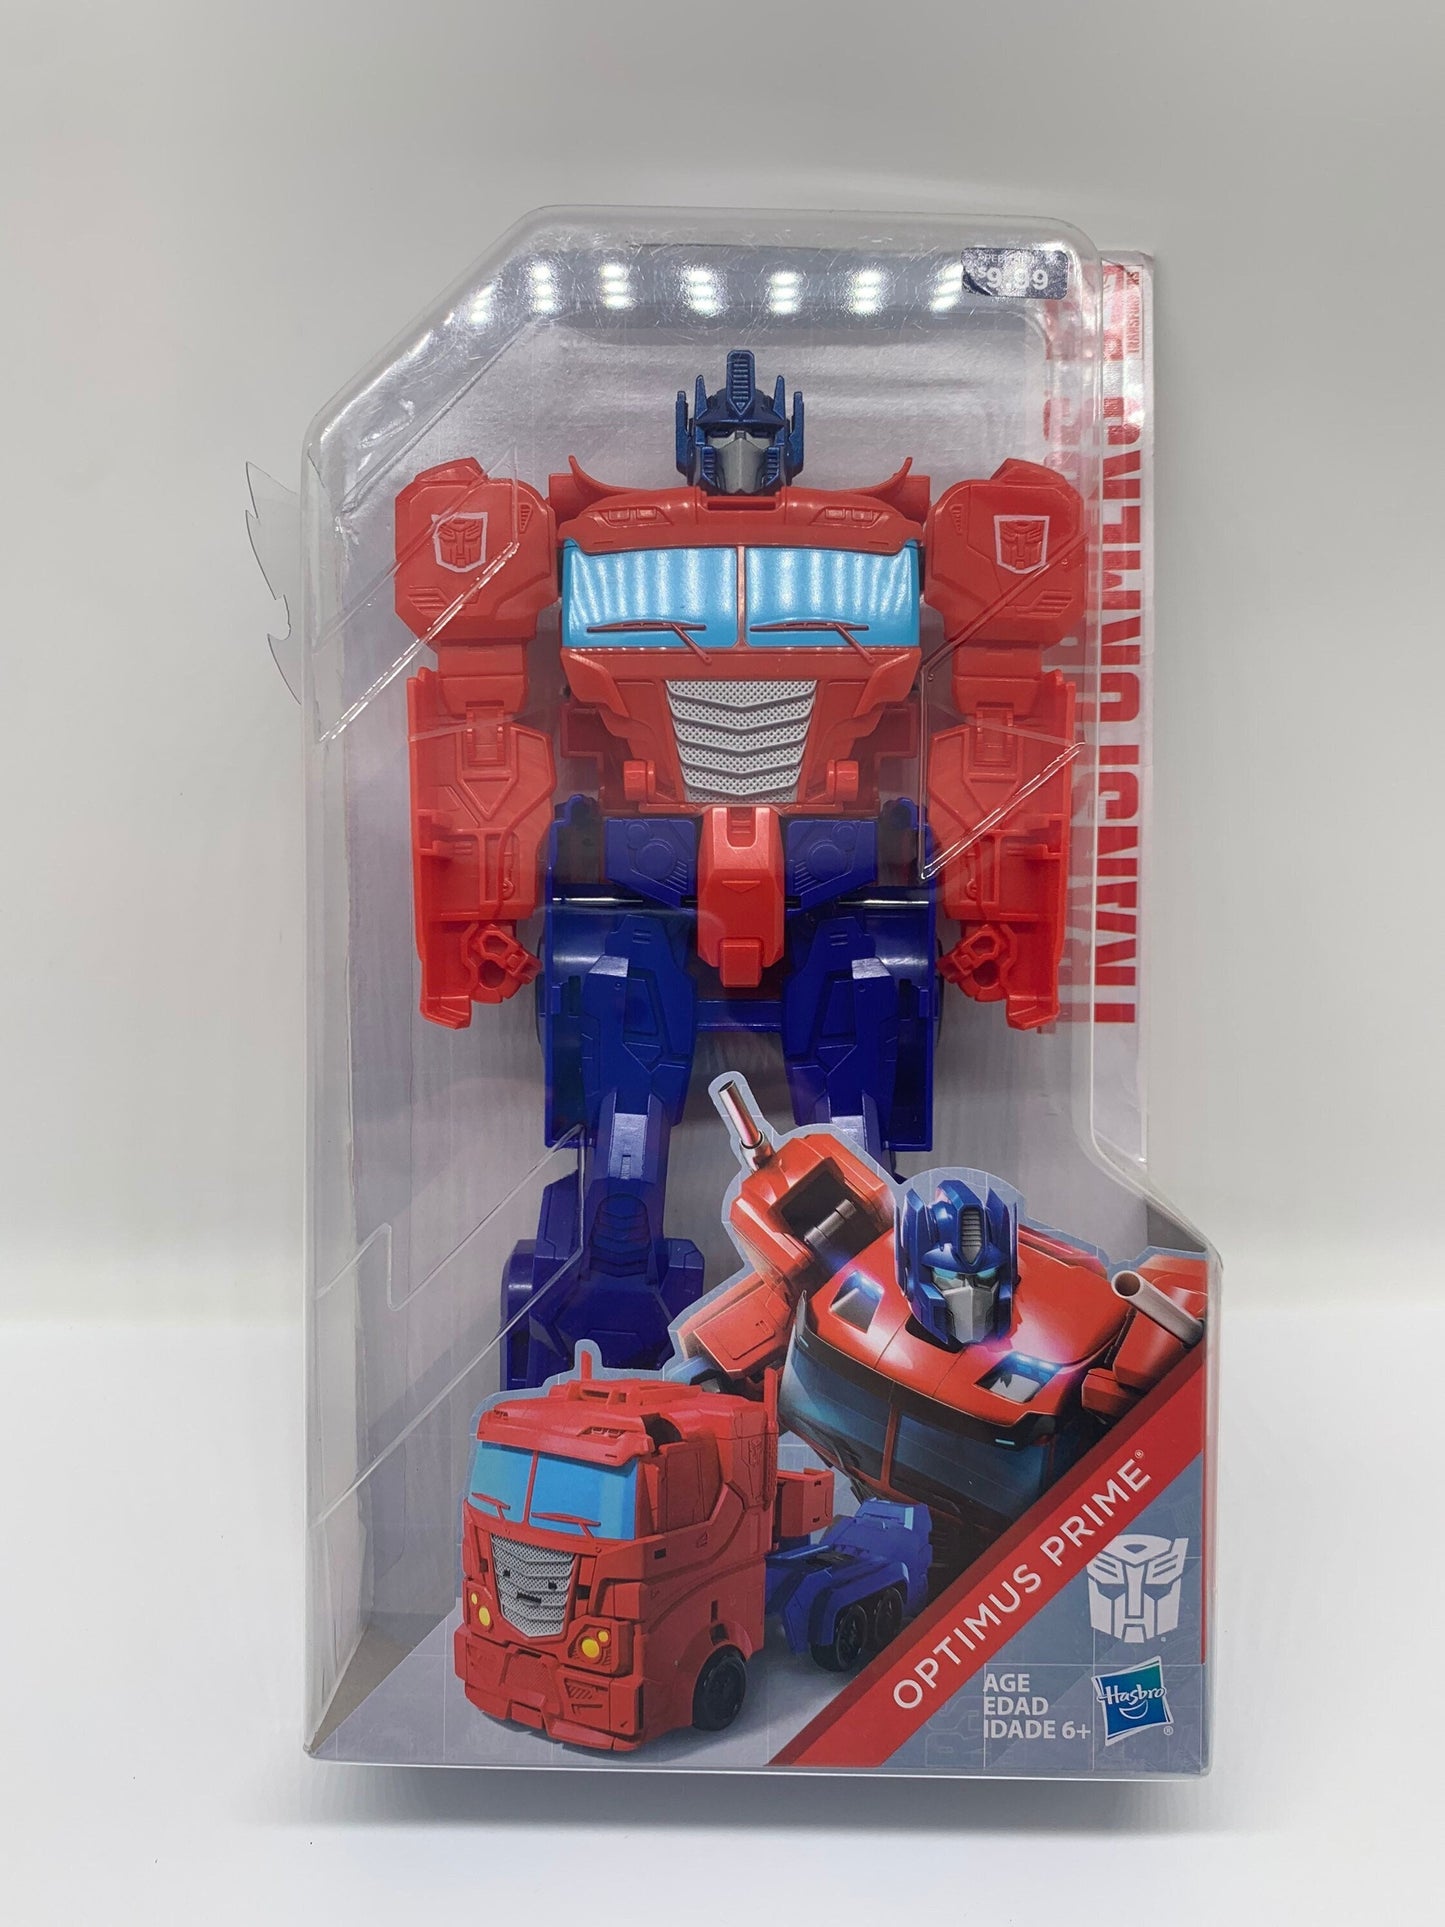 Transformers Optimus Prime Red Autobot Collectible Action Figure